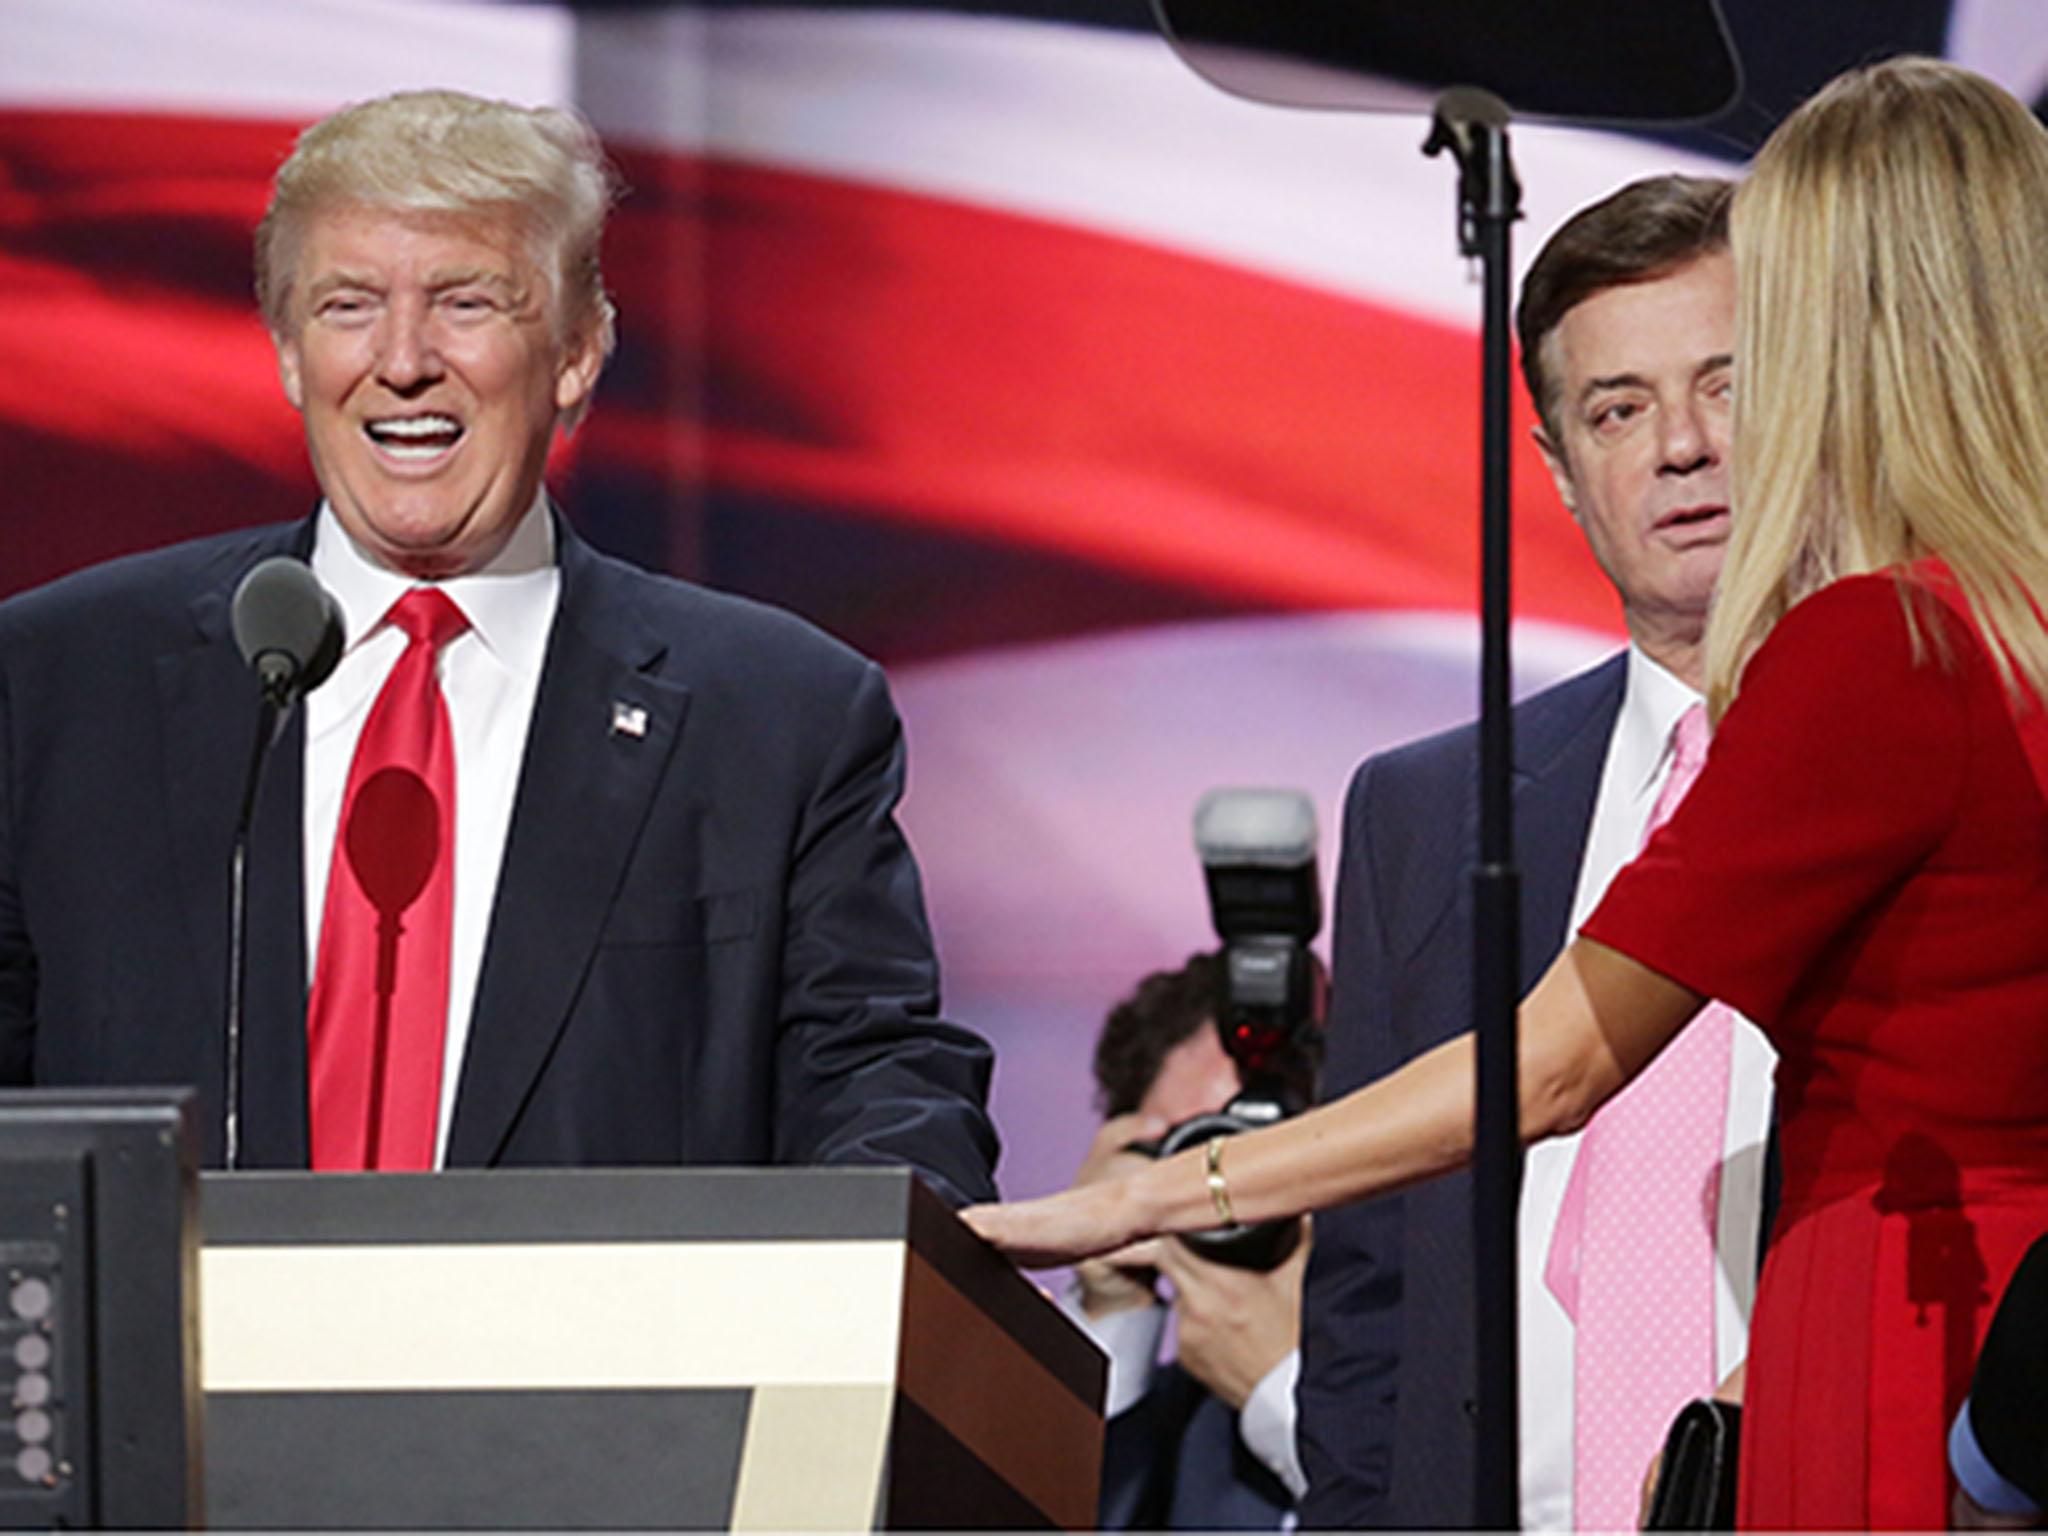 Donald Trump has appointed Paul Manafort chairman of his campaign team.